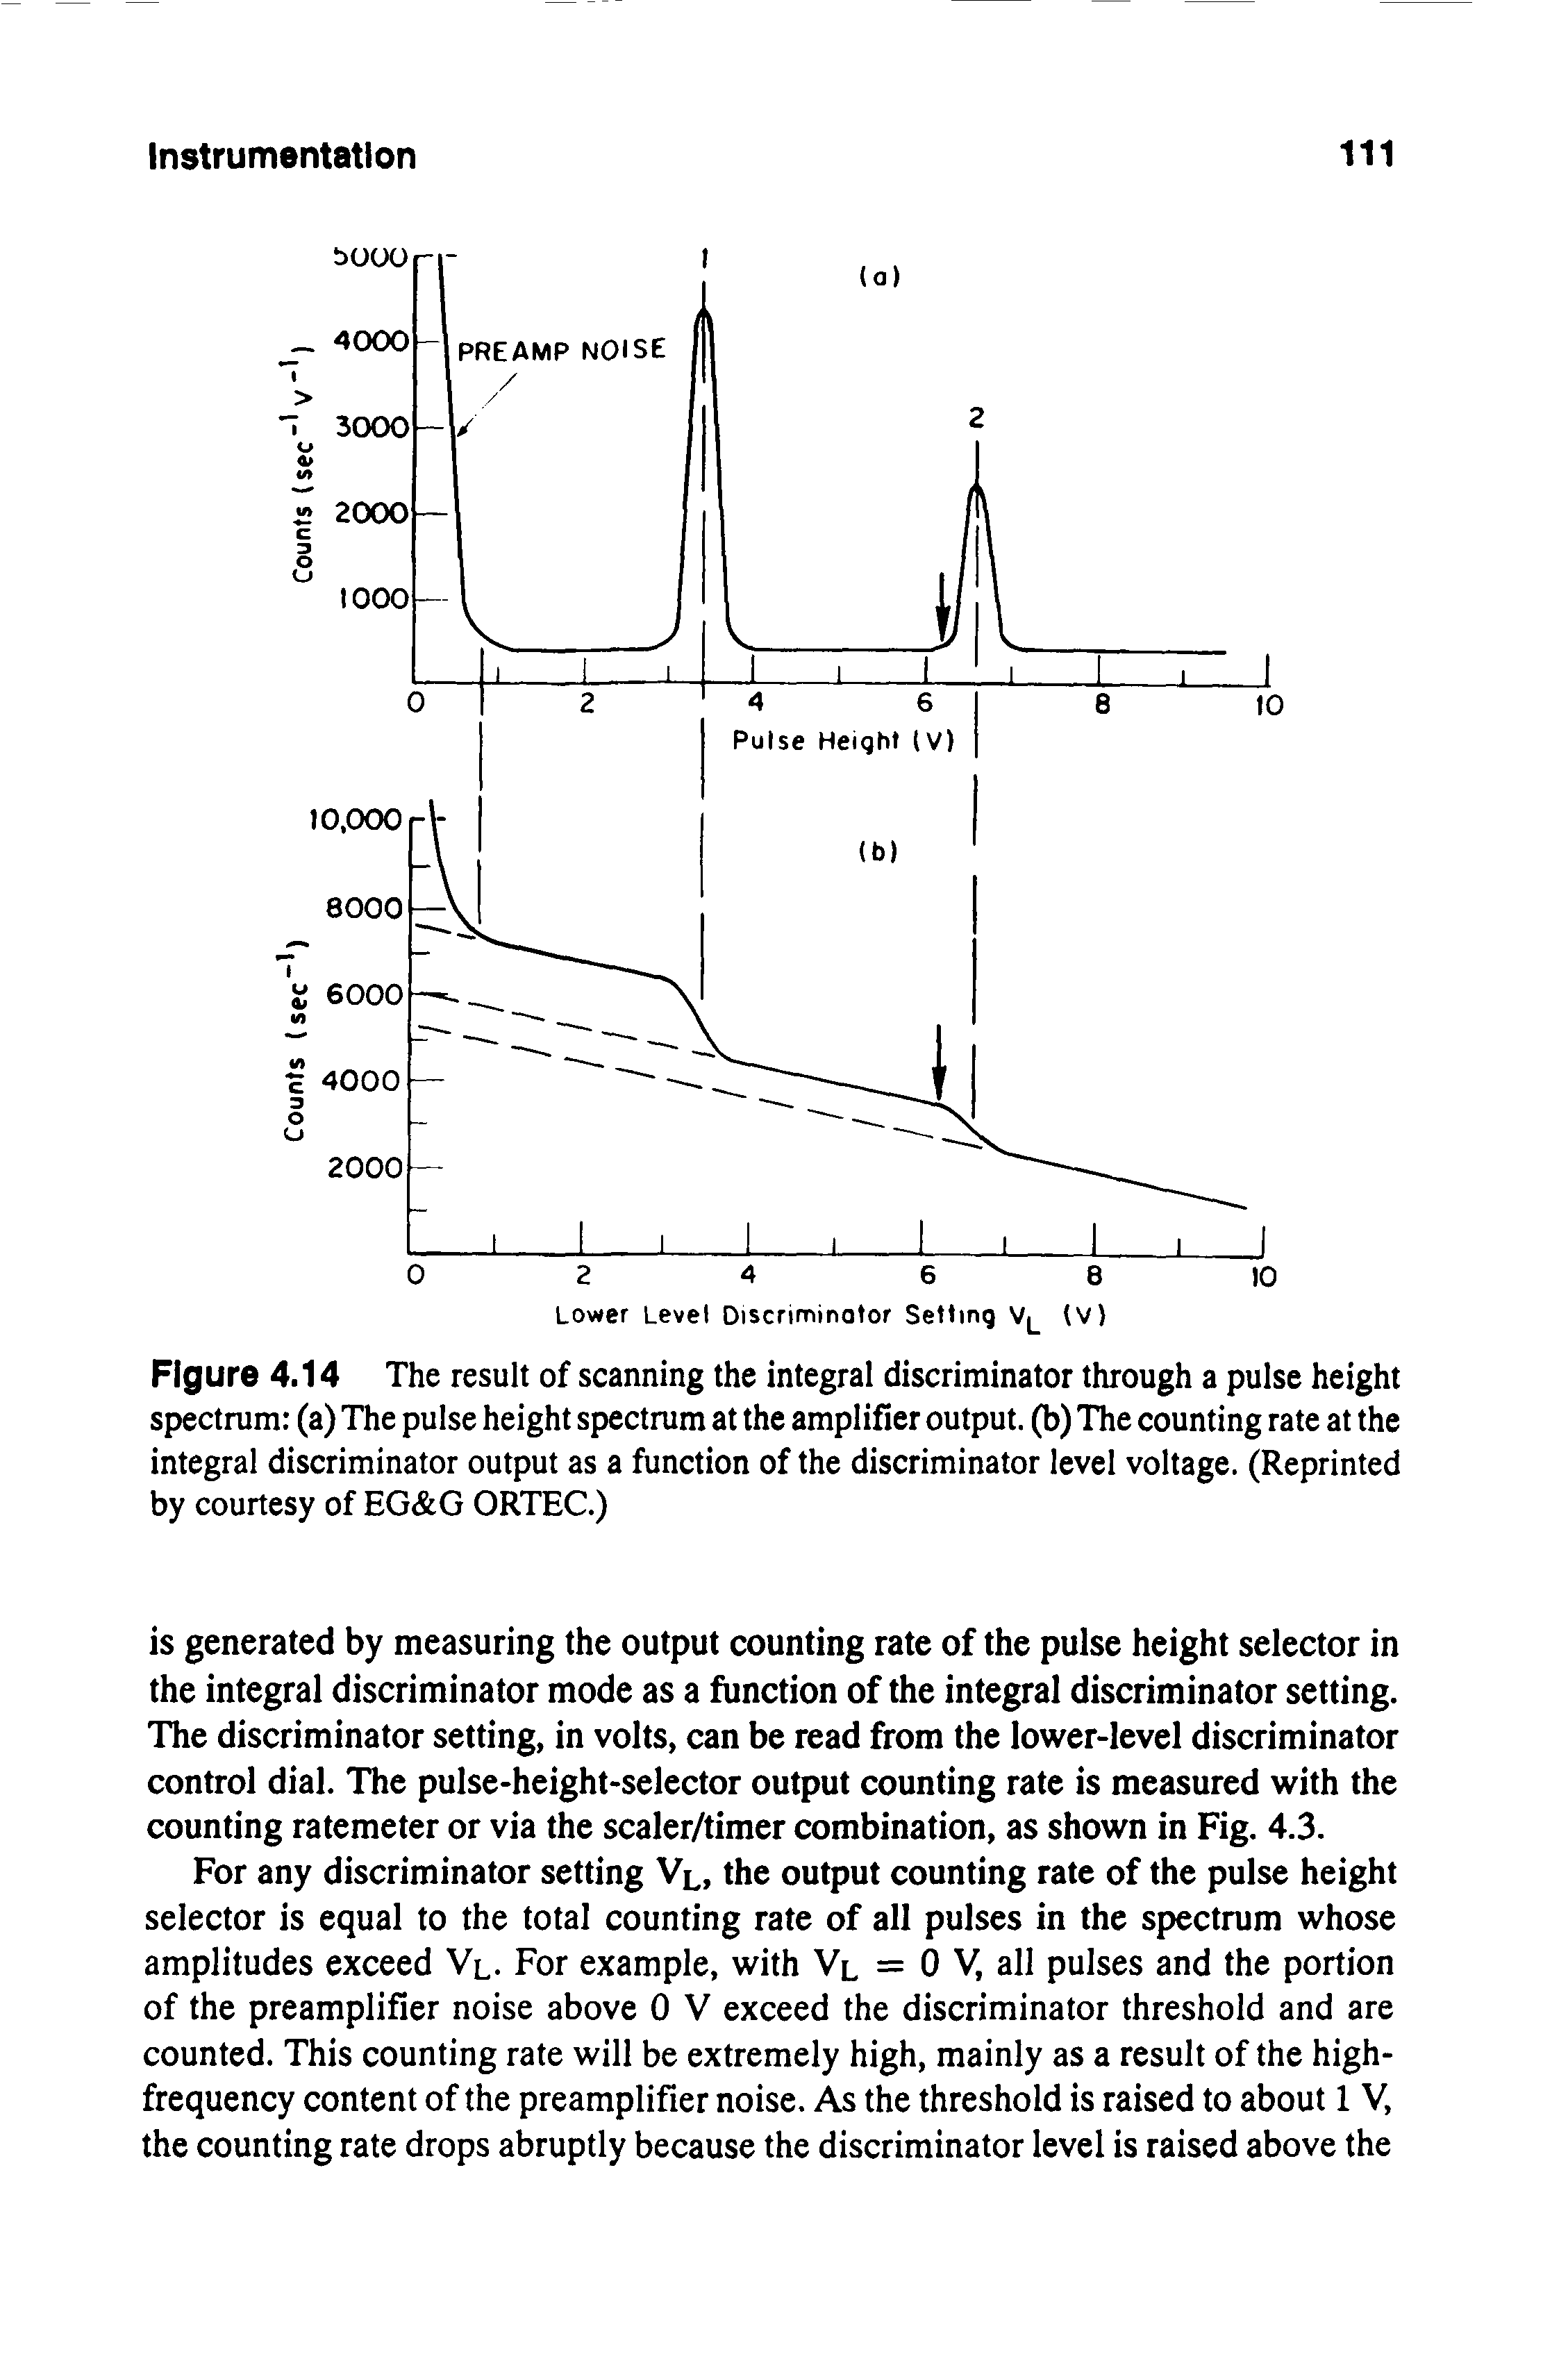 Figure 4.14 The result of scanning the integral discriminator through a pulse height spectrum (a) The pulse height spectrum at the amplifier output, (b) The counting rate at the integral discriminator output as a function of the discriminator level voltage. (Reprinted by courtesy of EG G ORTEC.)...